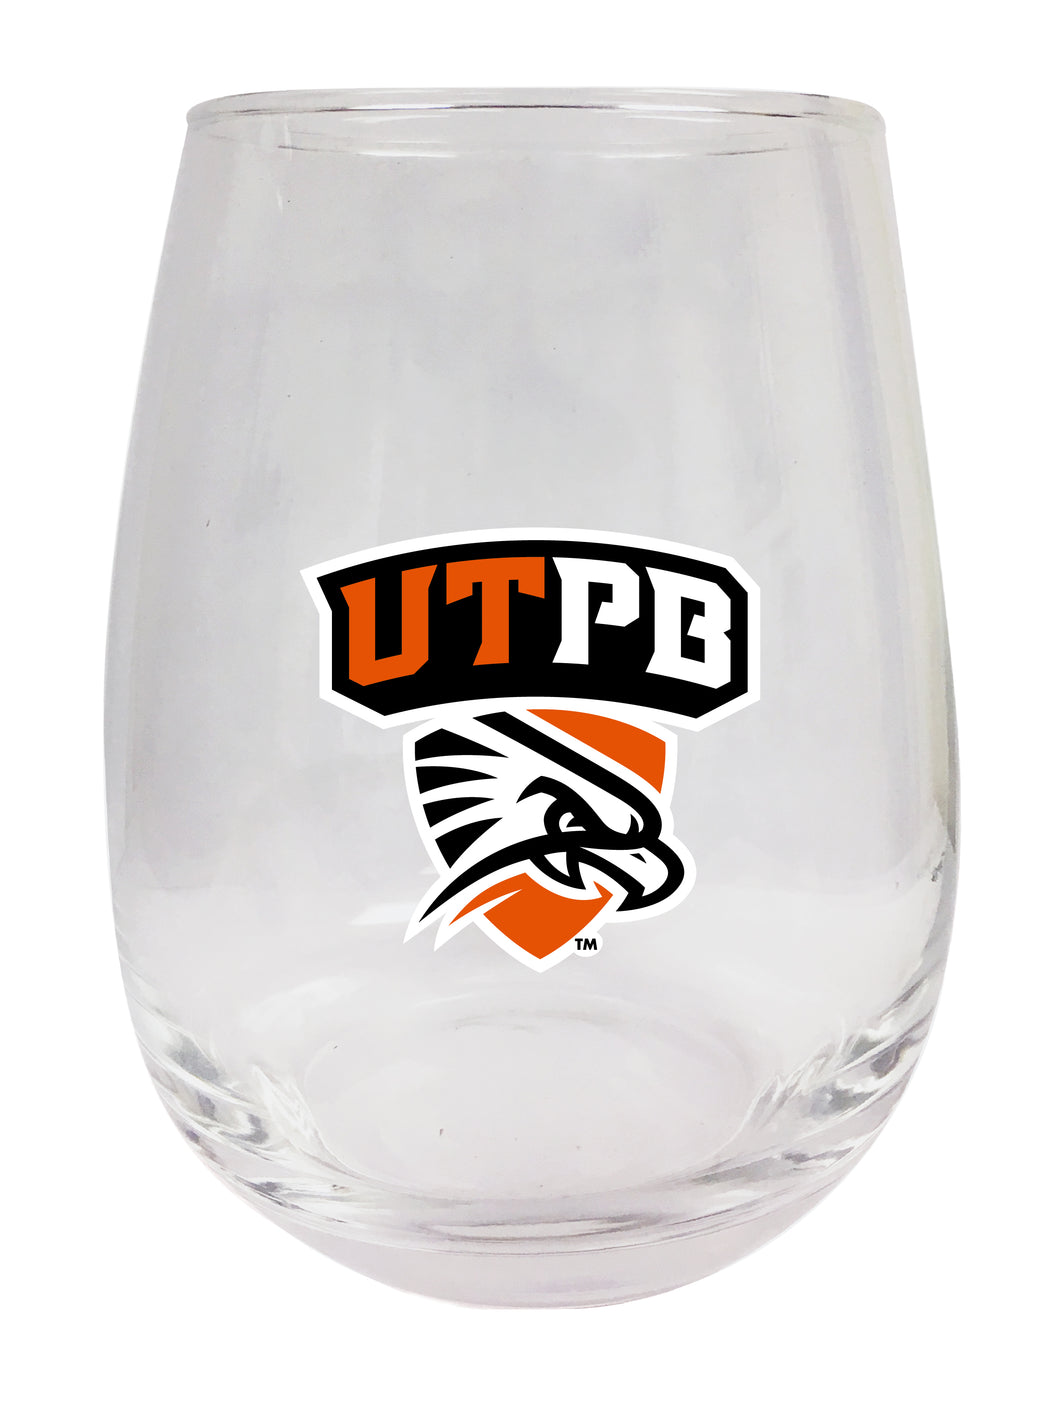 University of Texas of the Permian Basin Stemless Wine Glass - 9 oz. | Officially Licensed NCAA Merchandise